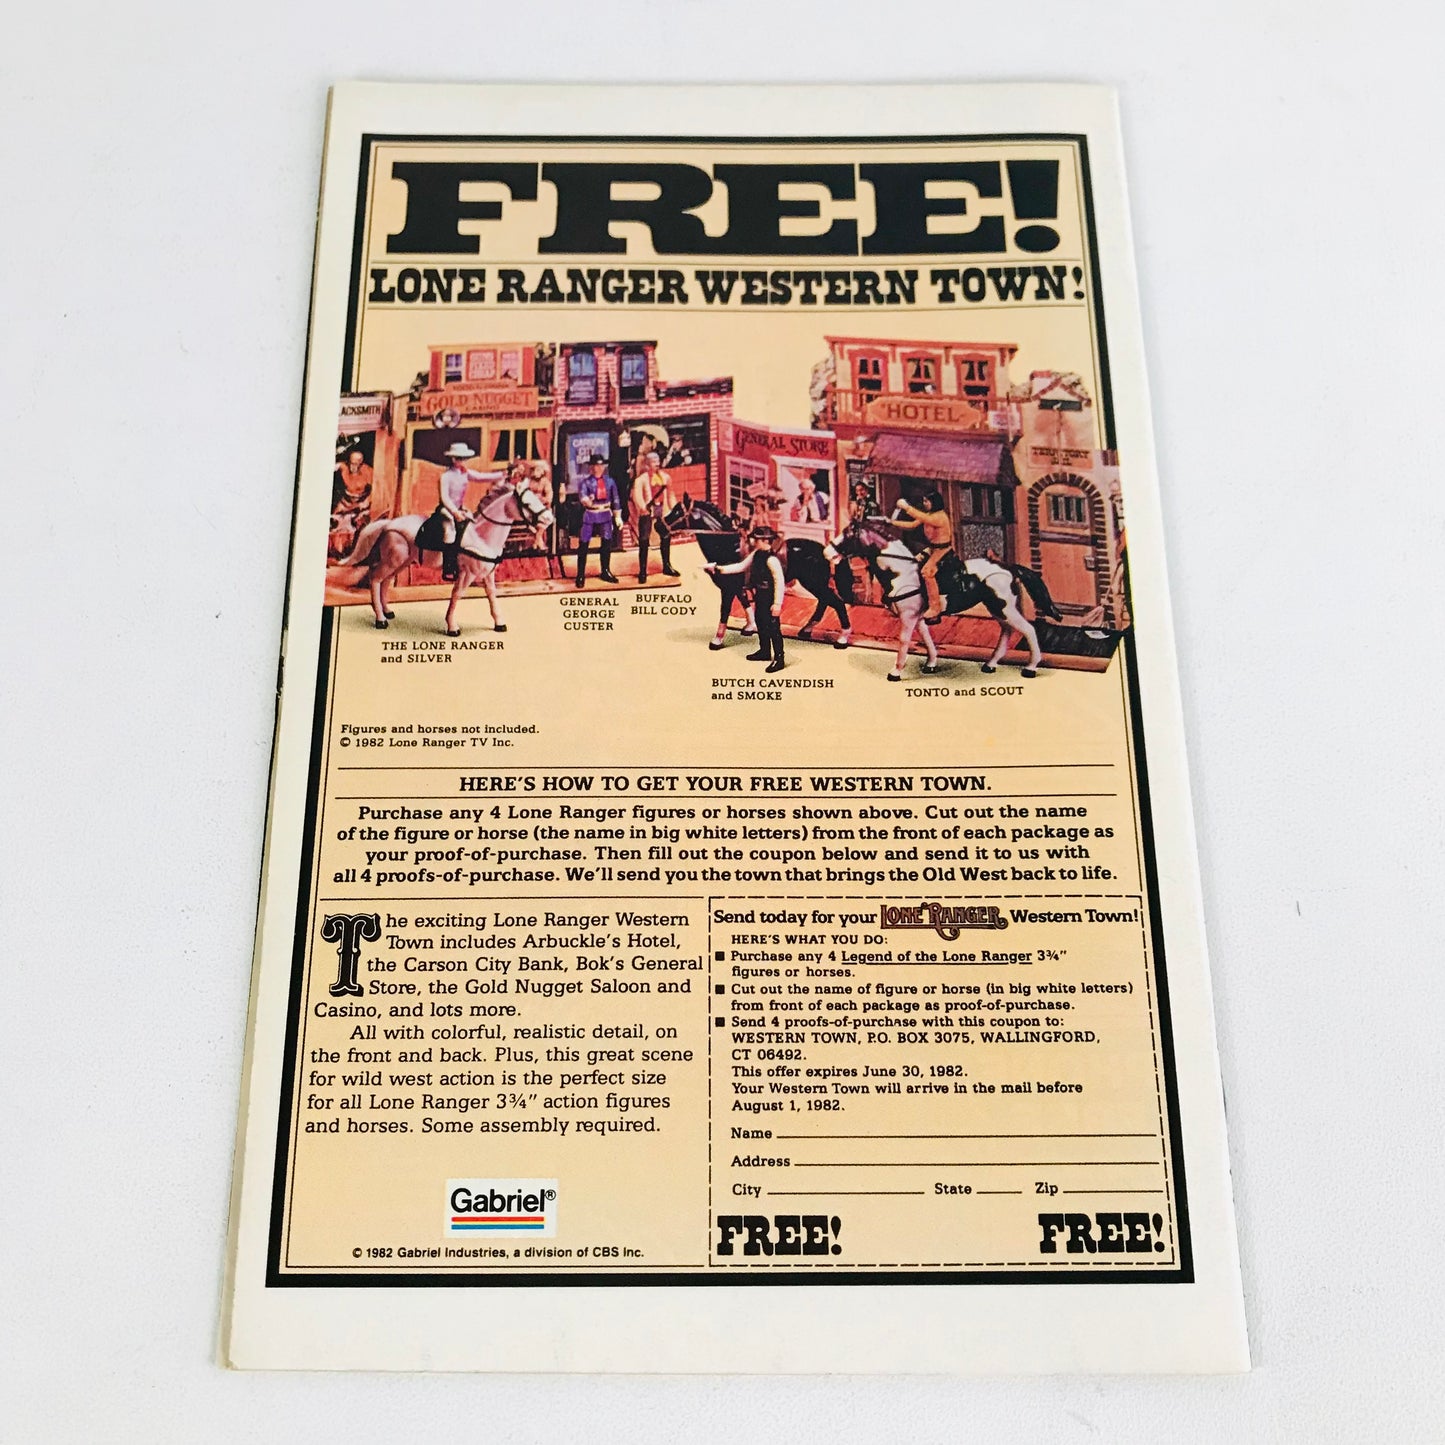 Back cover image of a Star Wars comic book featuring a mail away order form for a free Lone Ranger Western Town diorama.